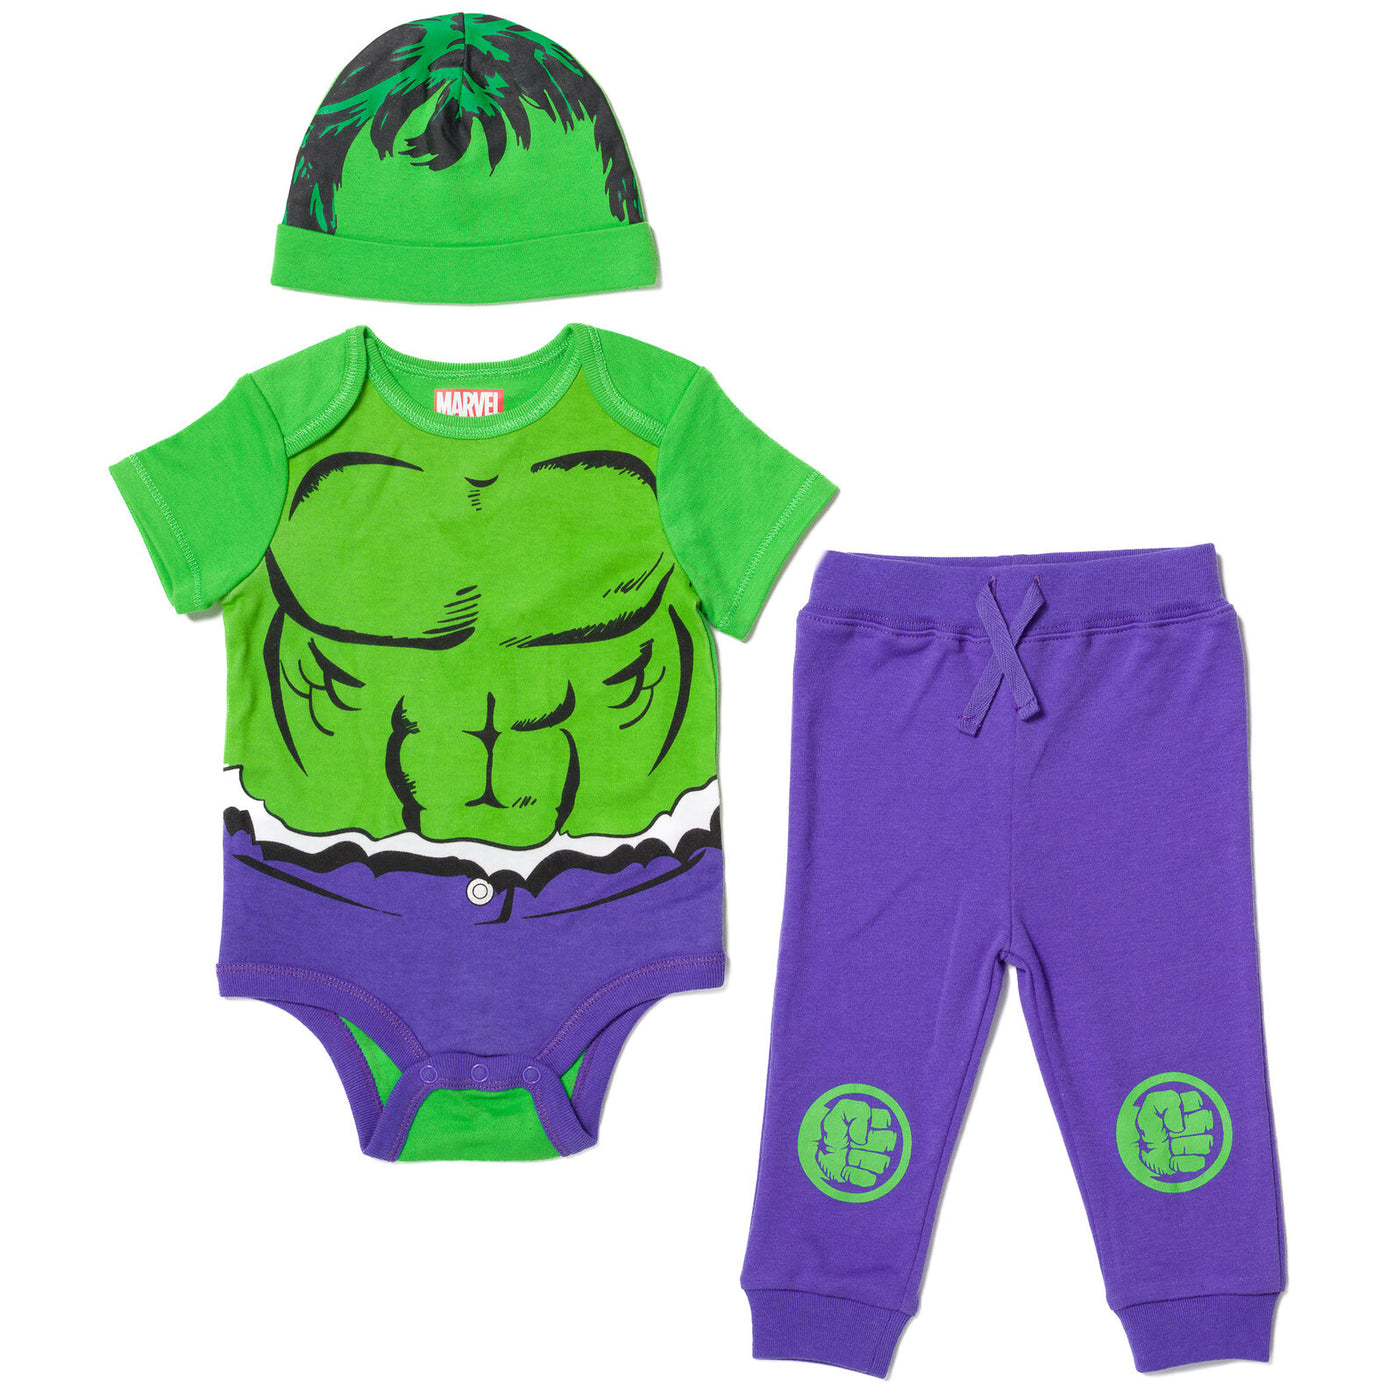 Marvel Avengers The Hulk Bodysuit Pants and Hat 3 Piece Outfit Set